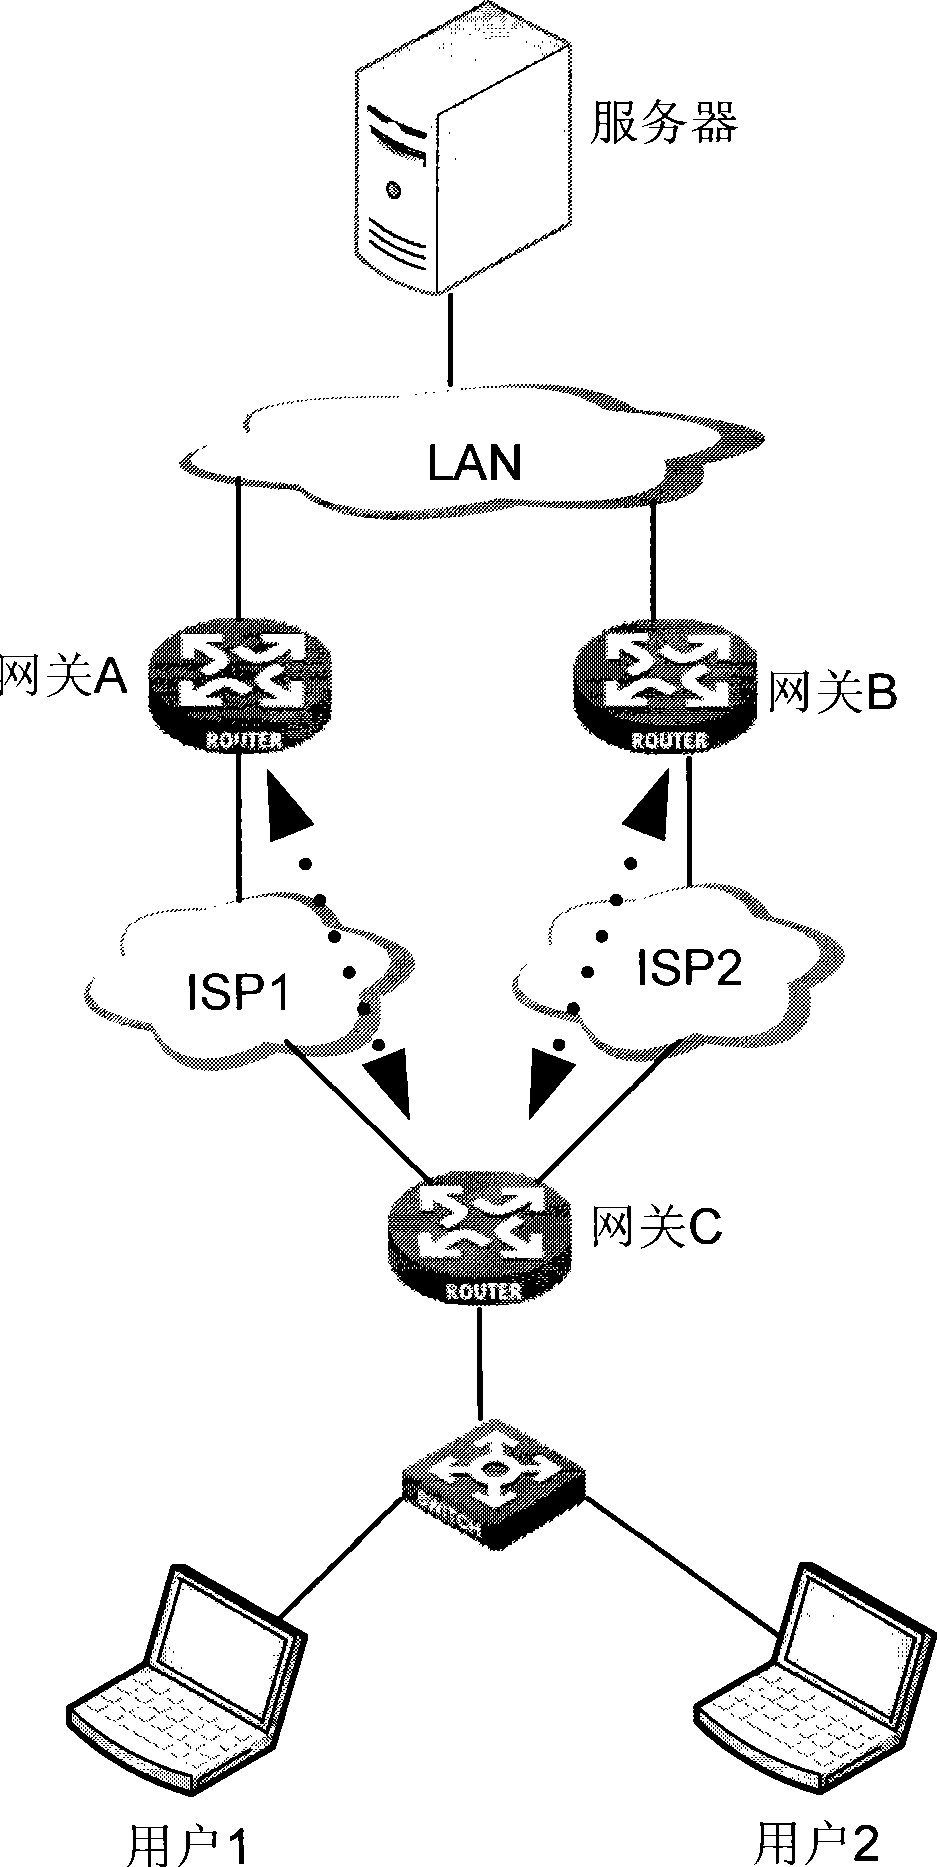 Method for implementing backup and switch of IPSec tunnel, system and node equipment, networking architecture